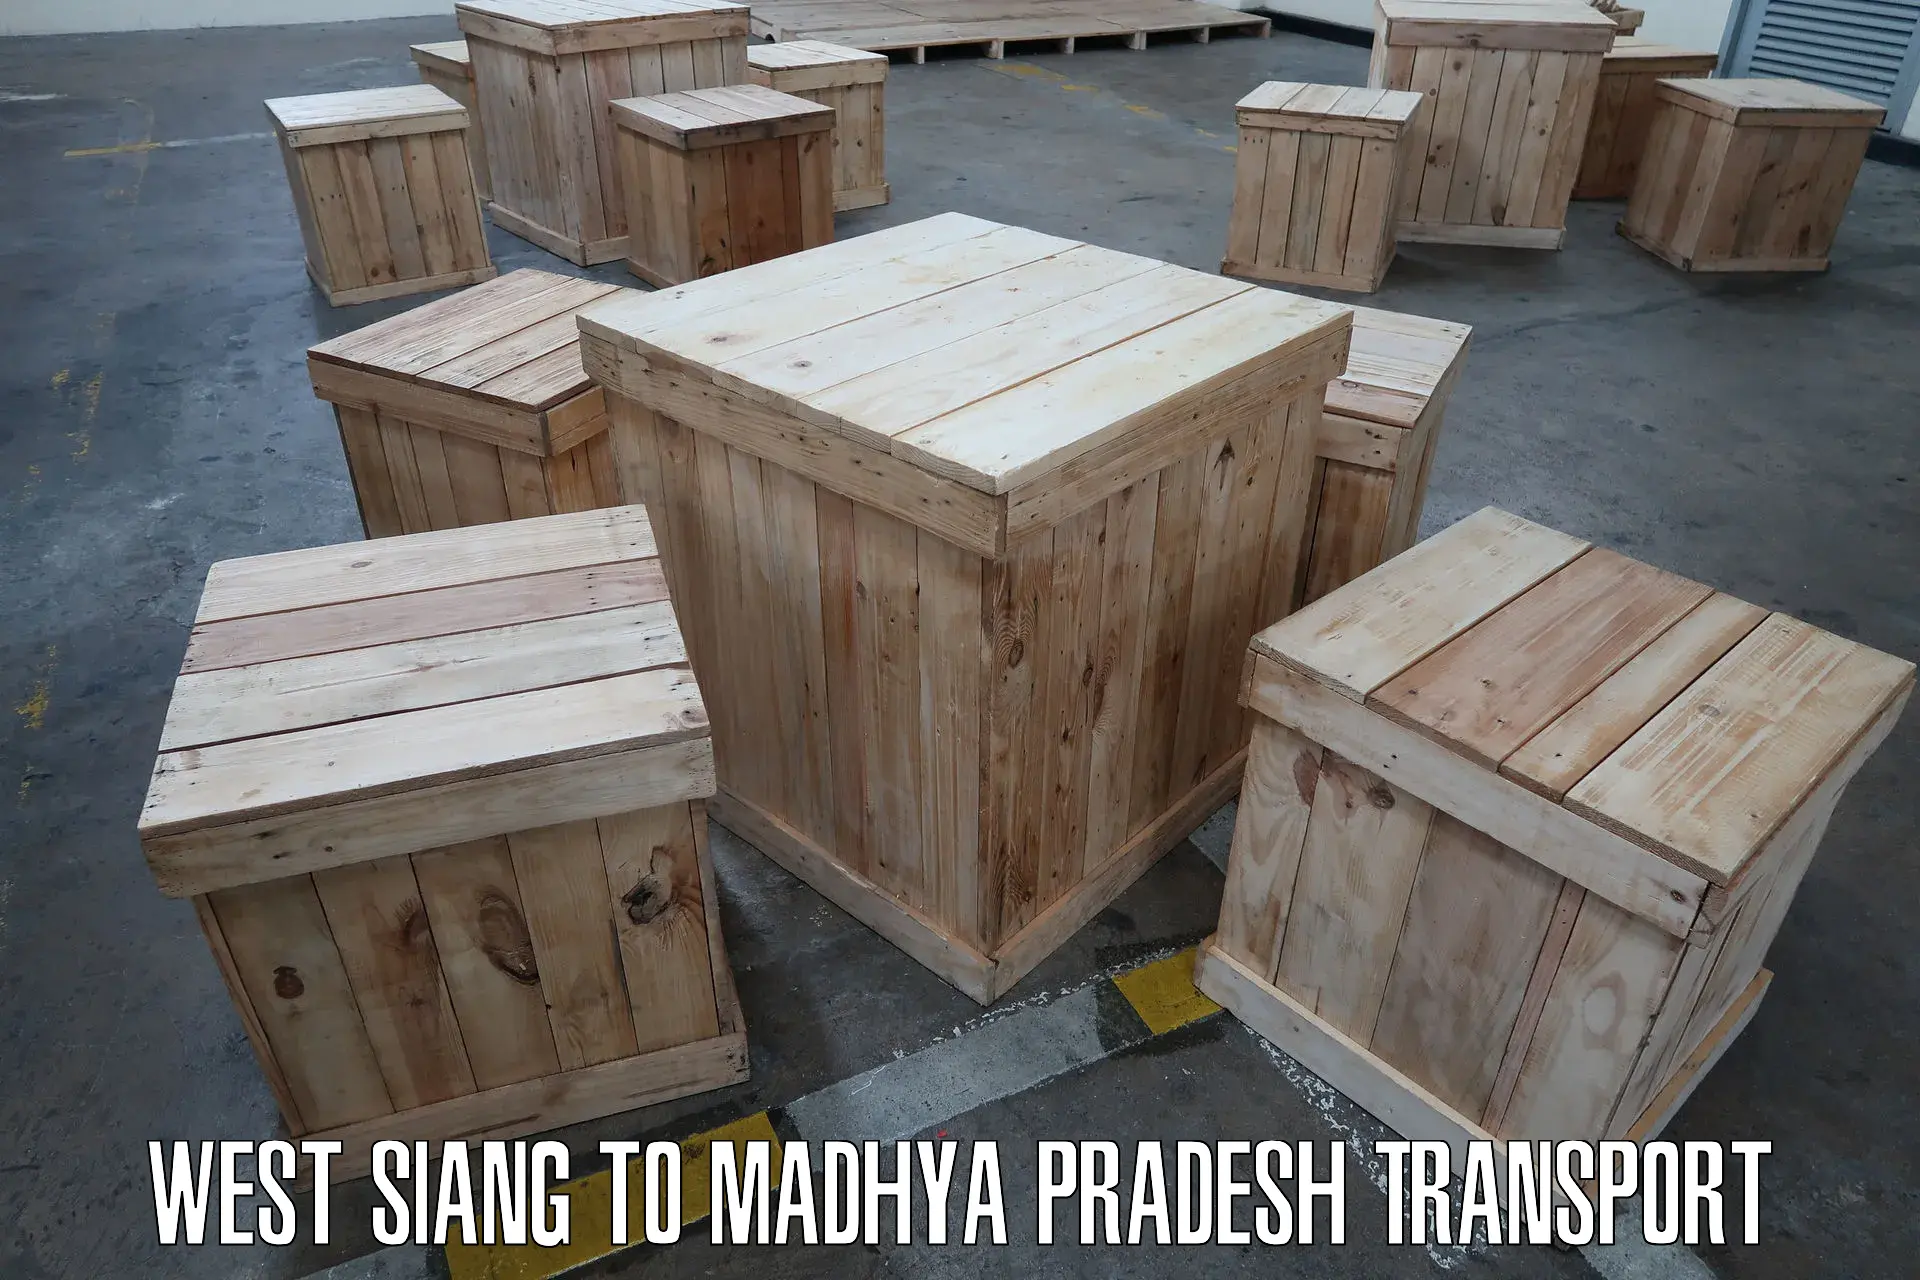 Road transport services in West Siang to Madhya Pradesh